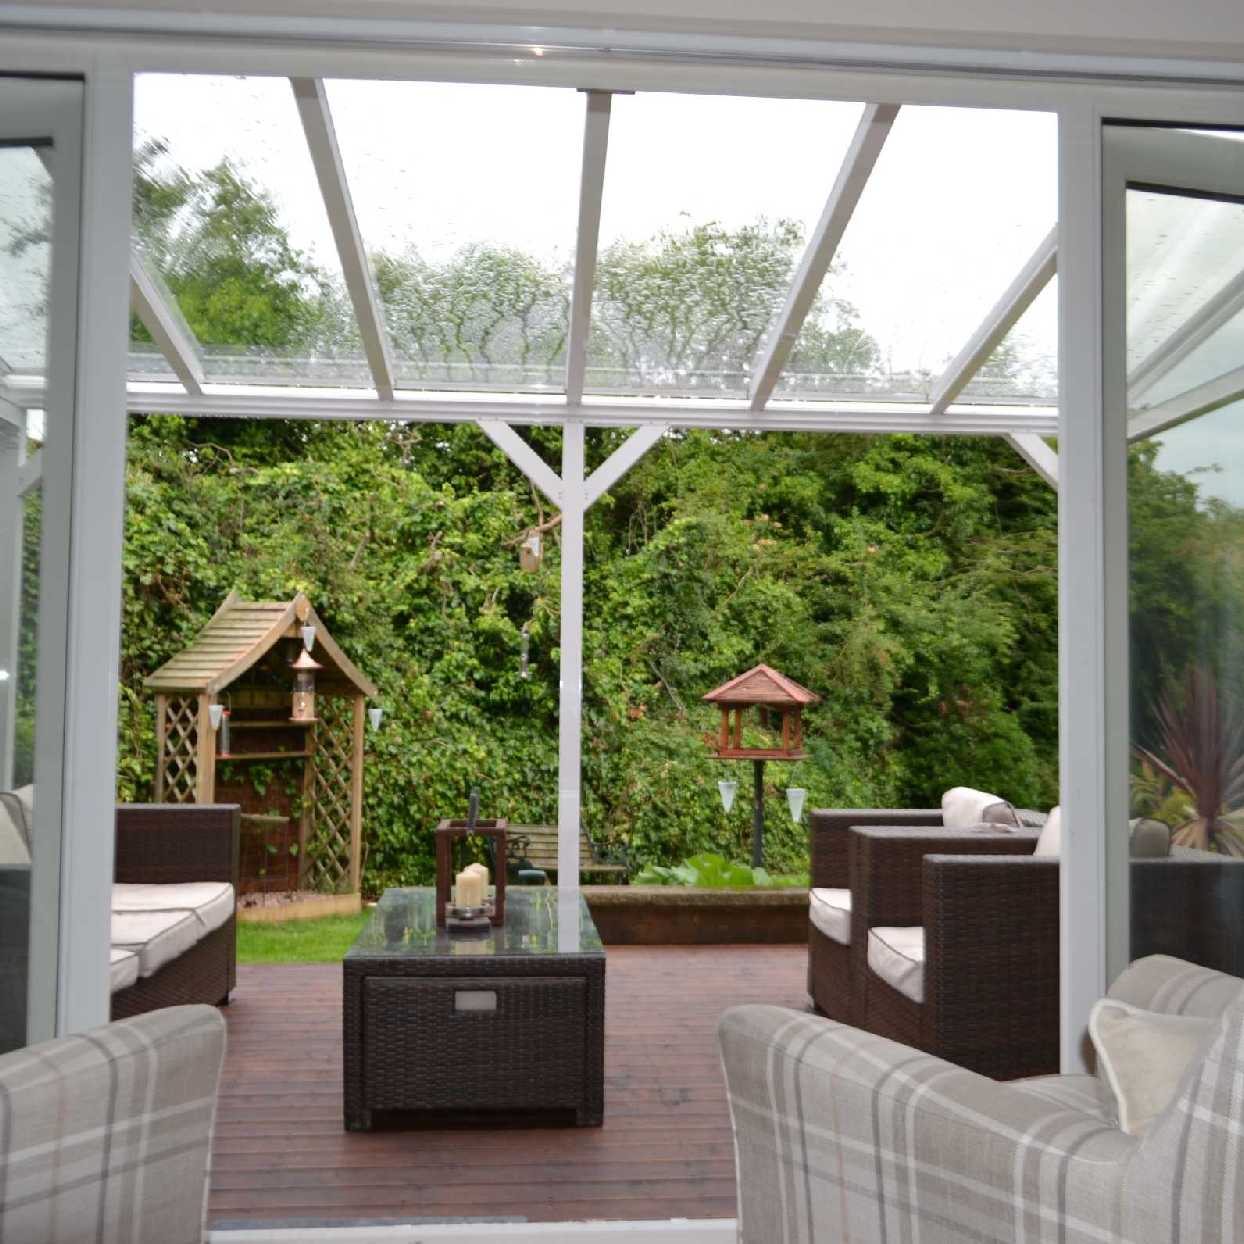 Great selection of Omega Smart Lean-To Canopy, White UNGLAZED for 6mm Glazing - 8.4m (W) x 2.0m (P), (4) Supporting Posts